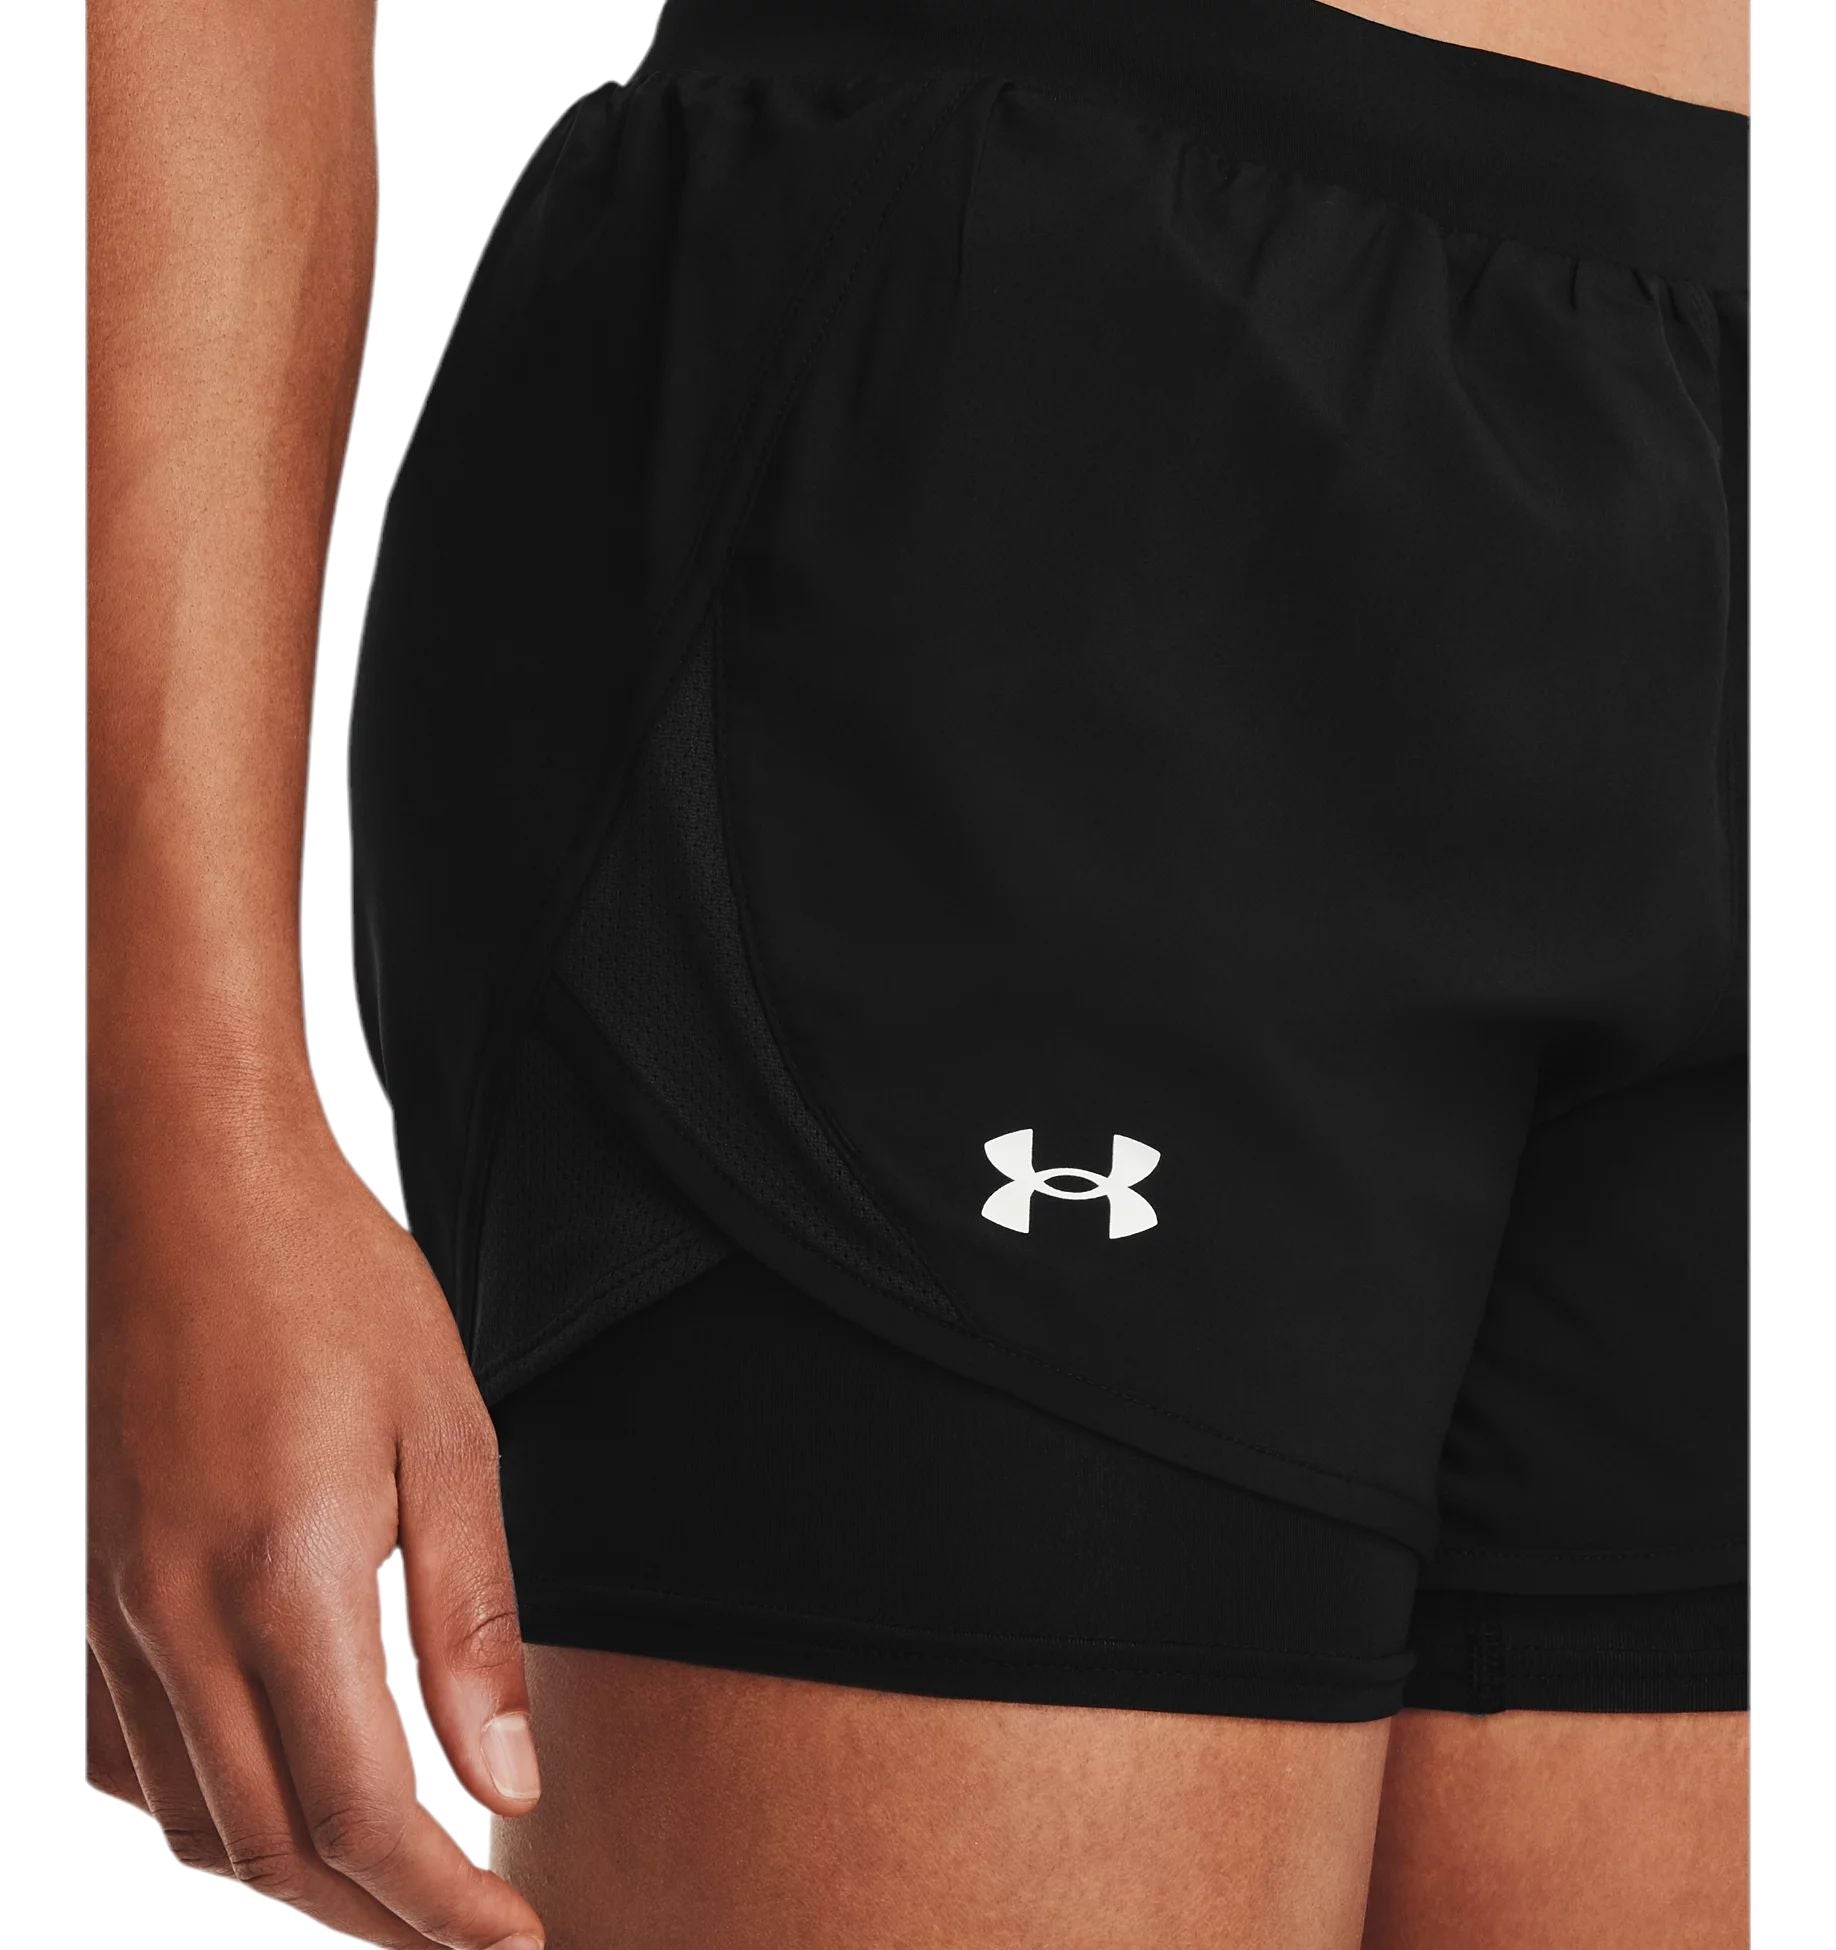 Women's Fly-By 2.0 2-in-1 Shorts Black/Reflective 